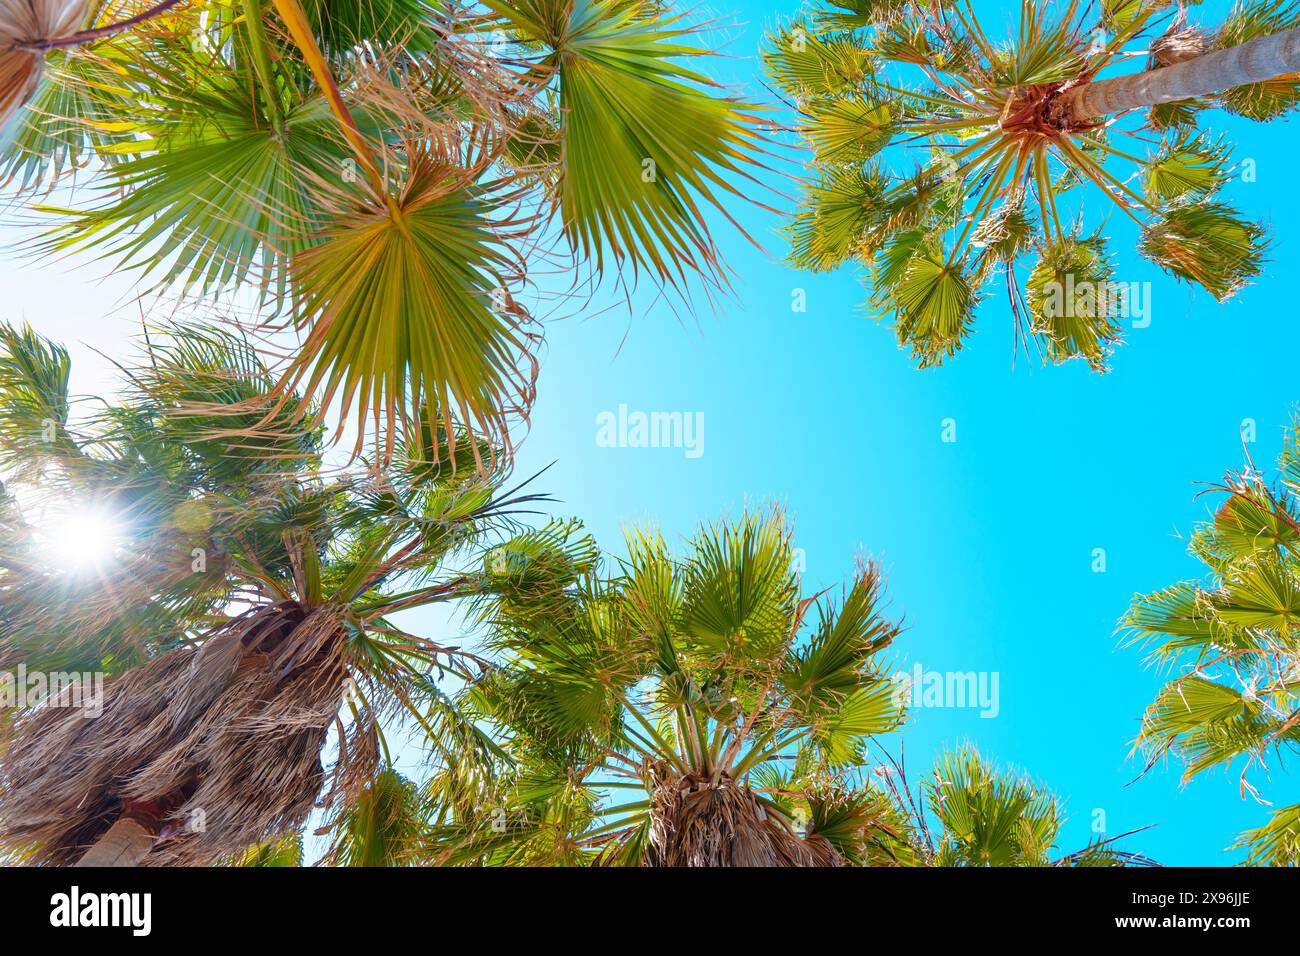 Serene patch of blue sky peeks through the lush, green canopies of palm trees Stock Photo